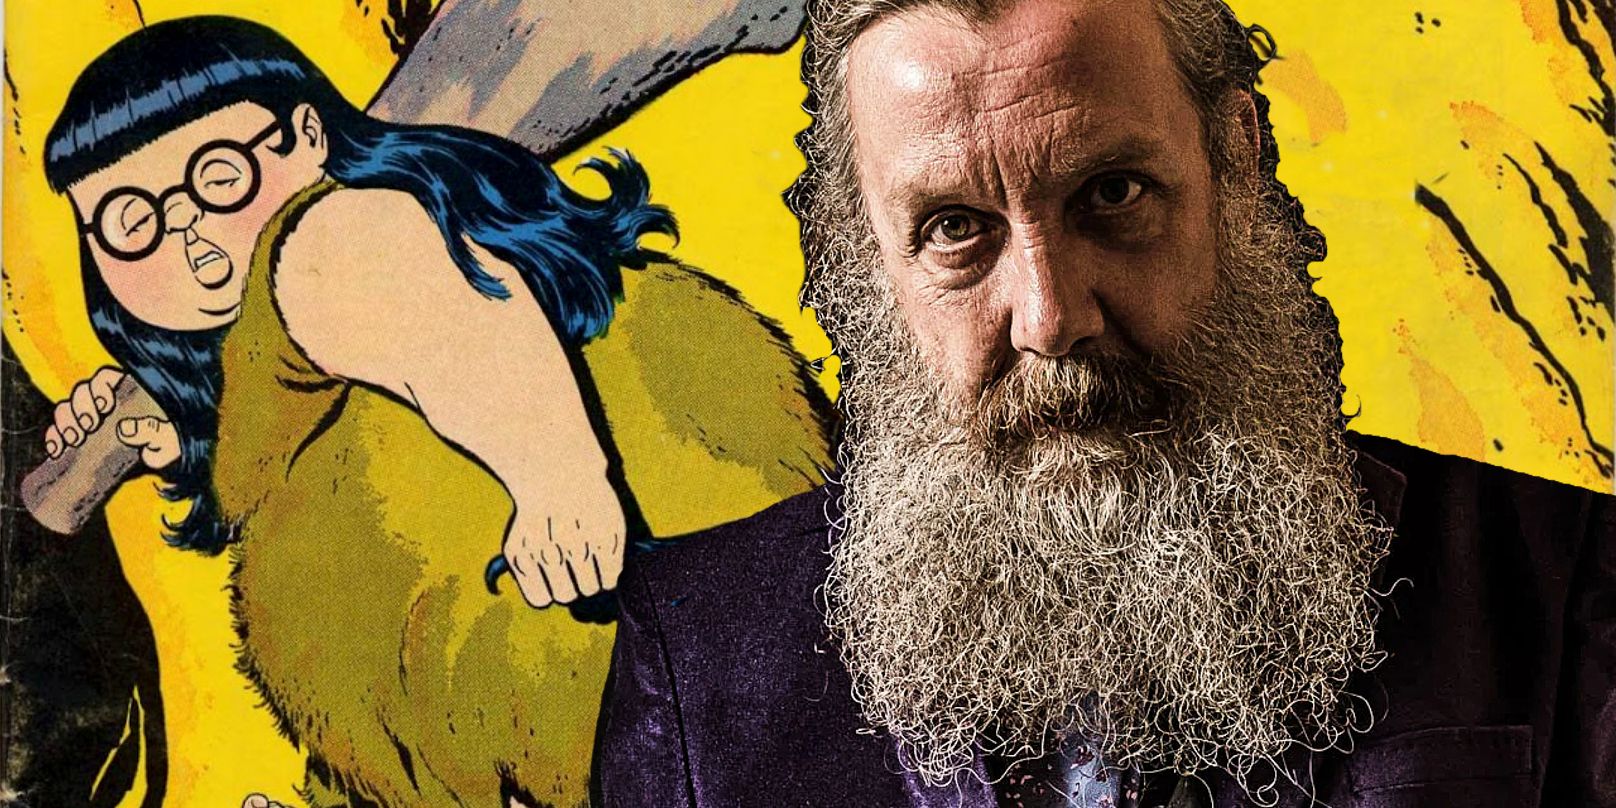 Alan Moore (foreground) with his favorite comic book superhero, Herbie, in the background